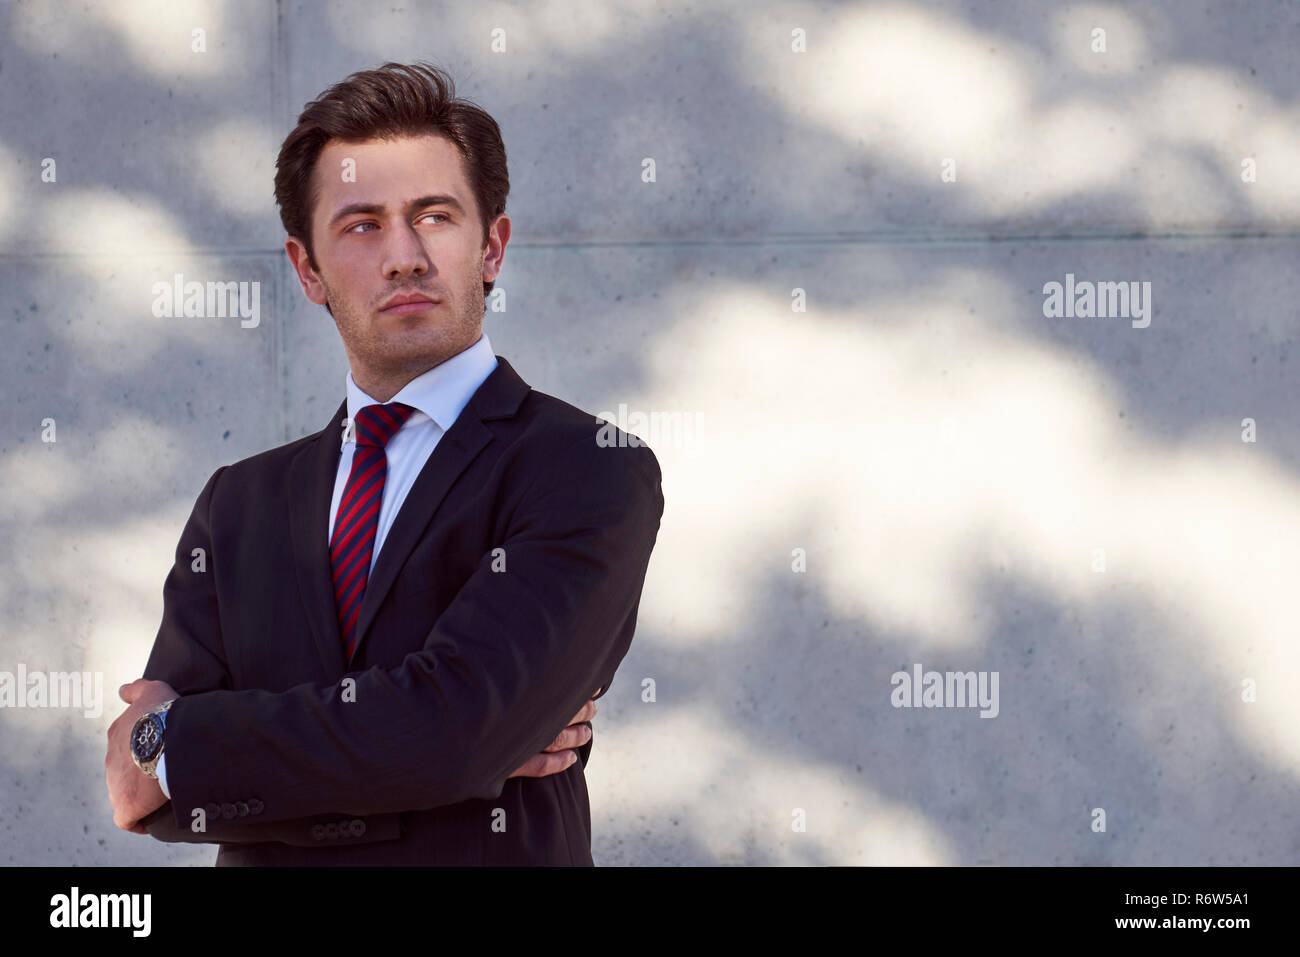 Portraits from a business man Stock Photo